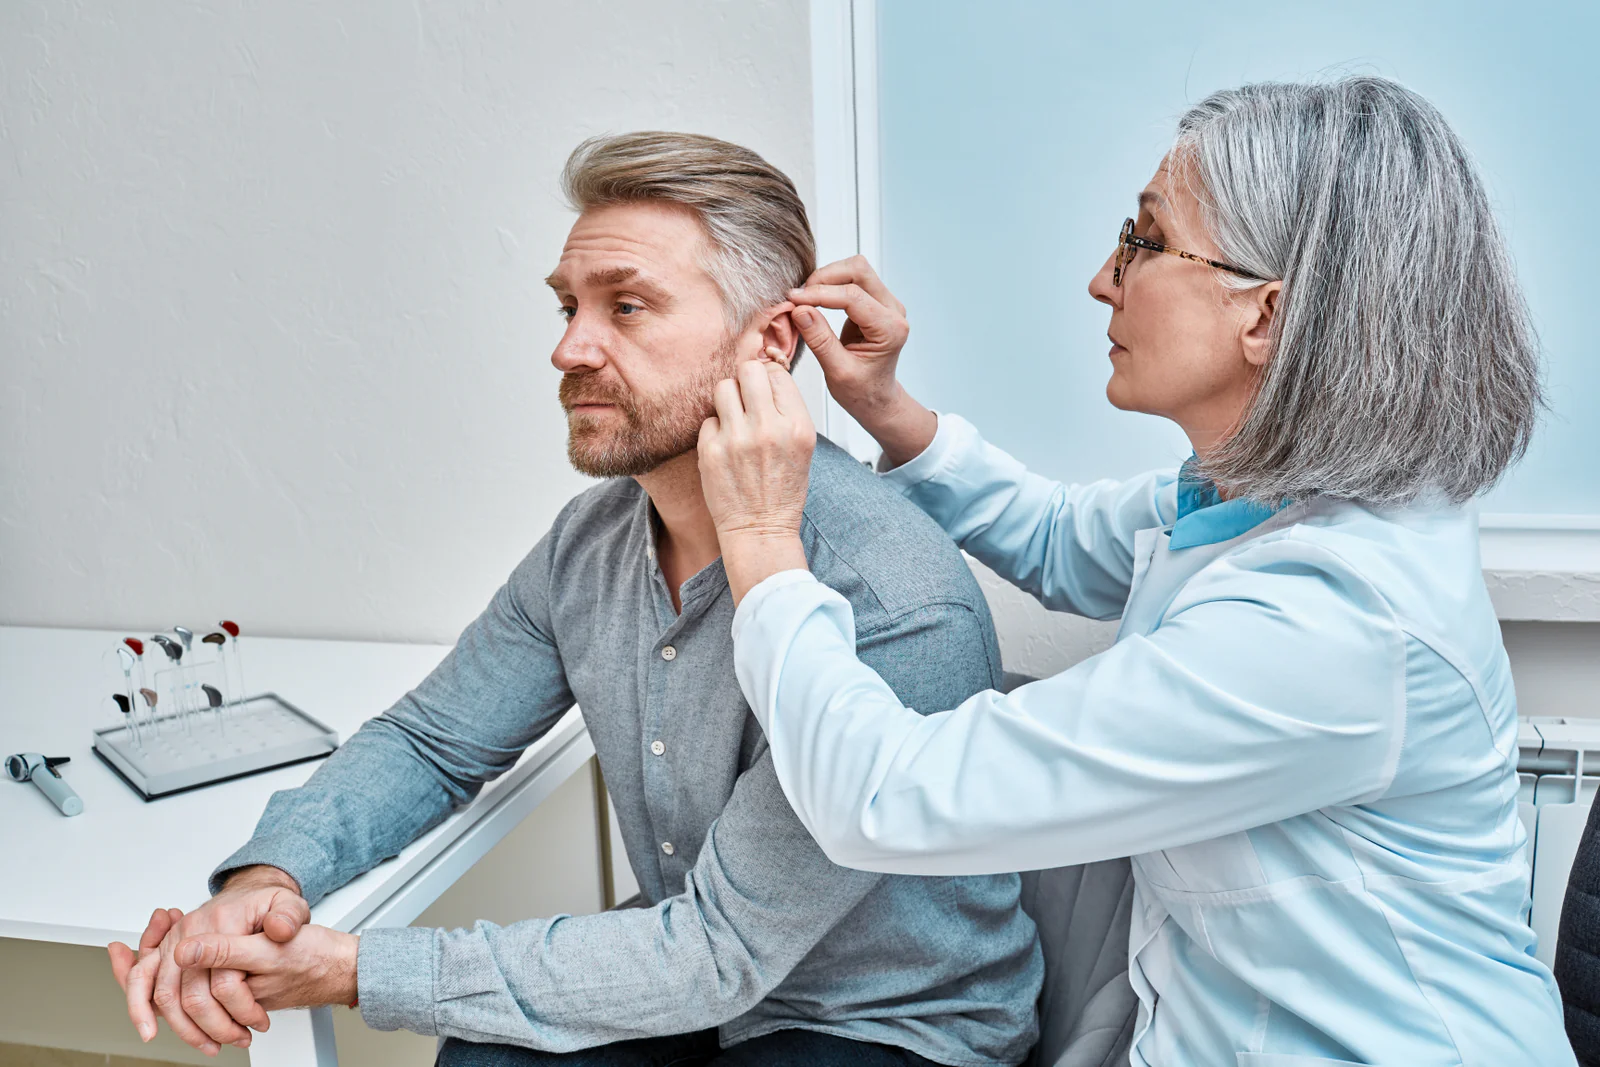 Healthcare professional examining a man's ears, part of the hearing services program Australia.